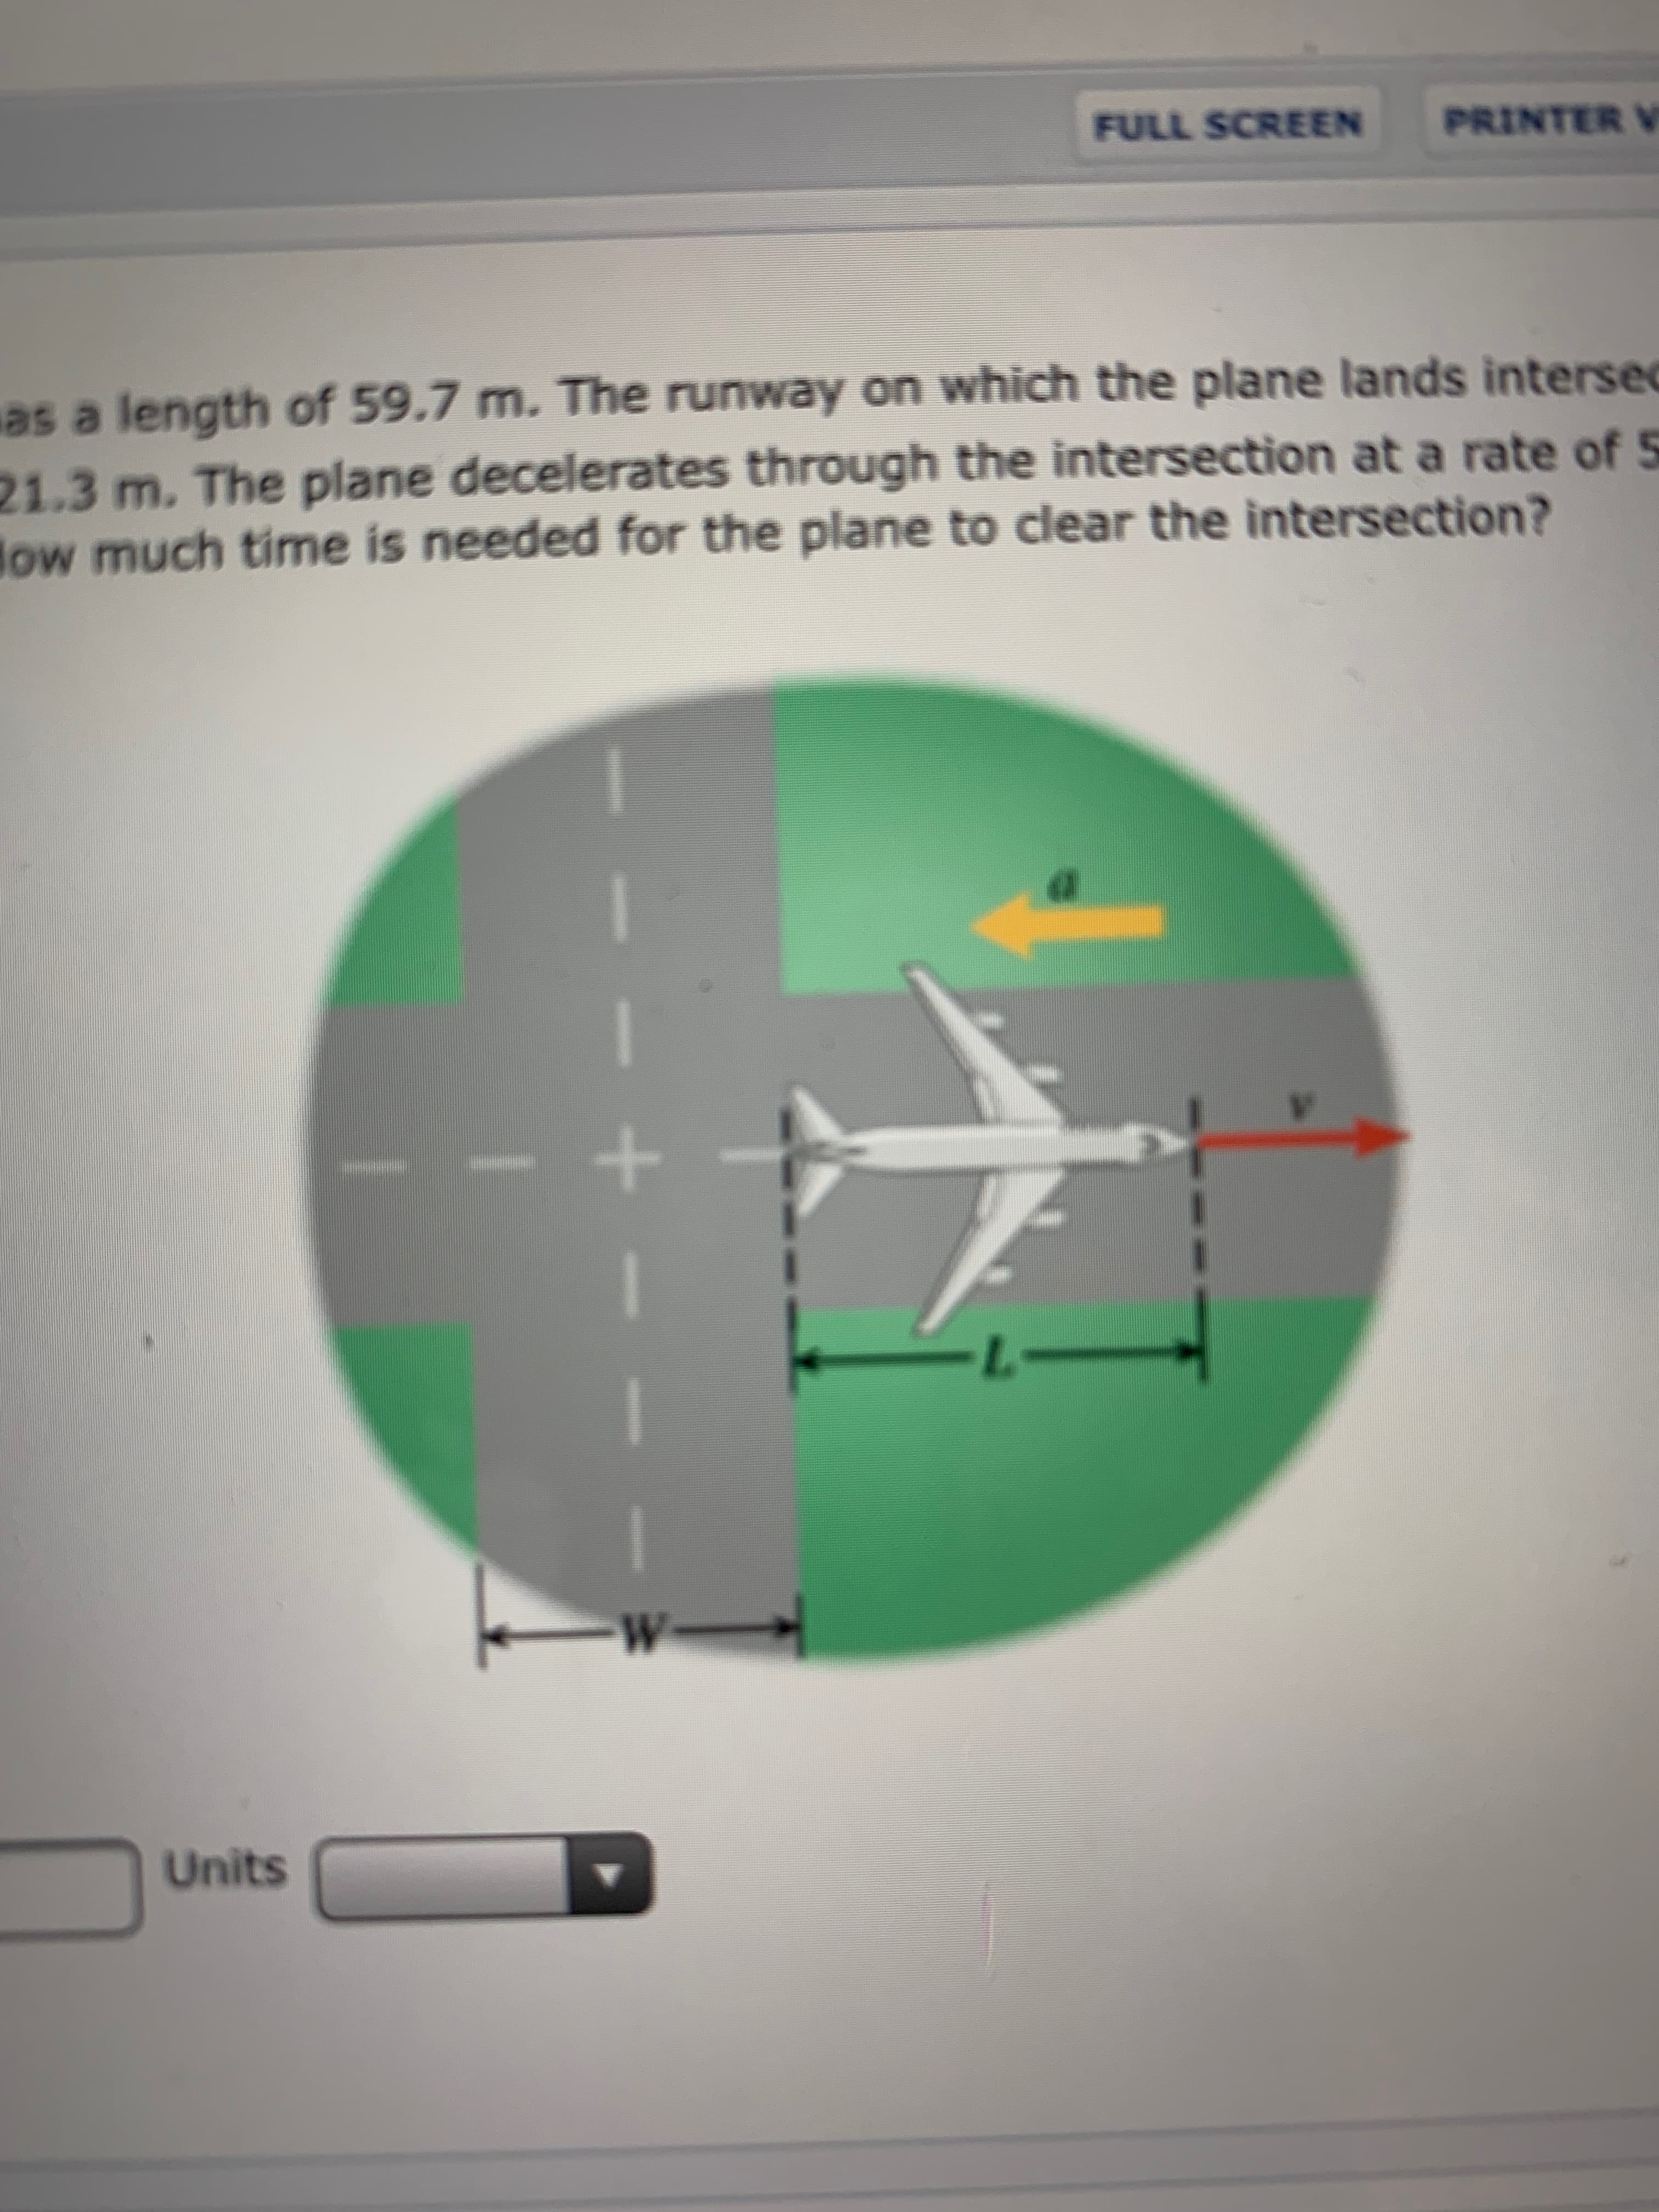 PRINTER V
FULL SCREEN
as a length of 59.7 m. The runway on which the plane lands intersec
21.3 m. The plane decelerates through the intersection at a rate of 5
low much time is needed for the plane to clear the intersection?
W-
Units
